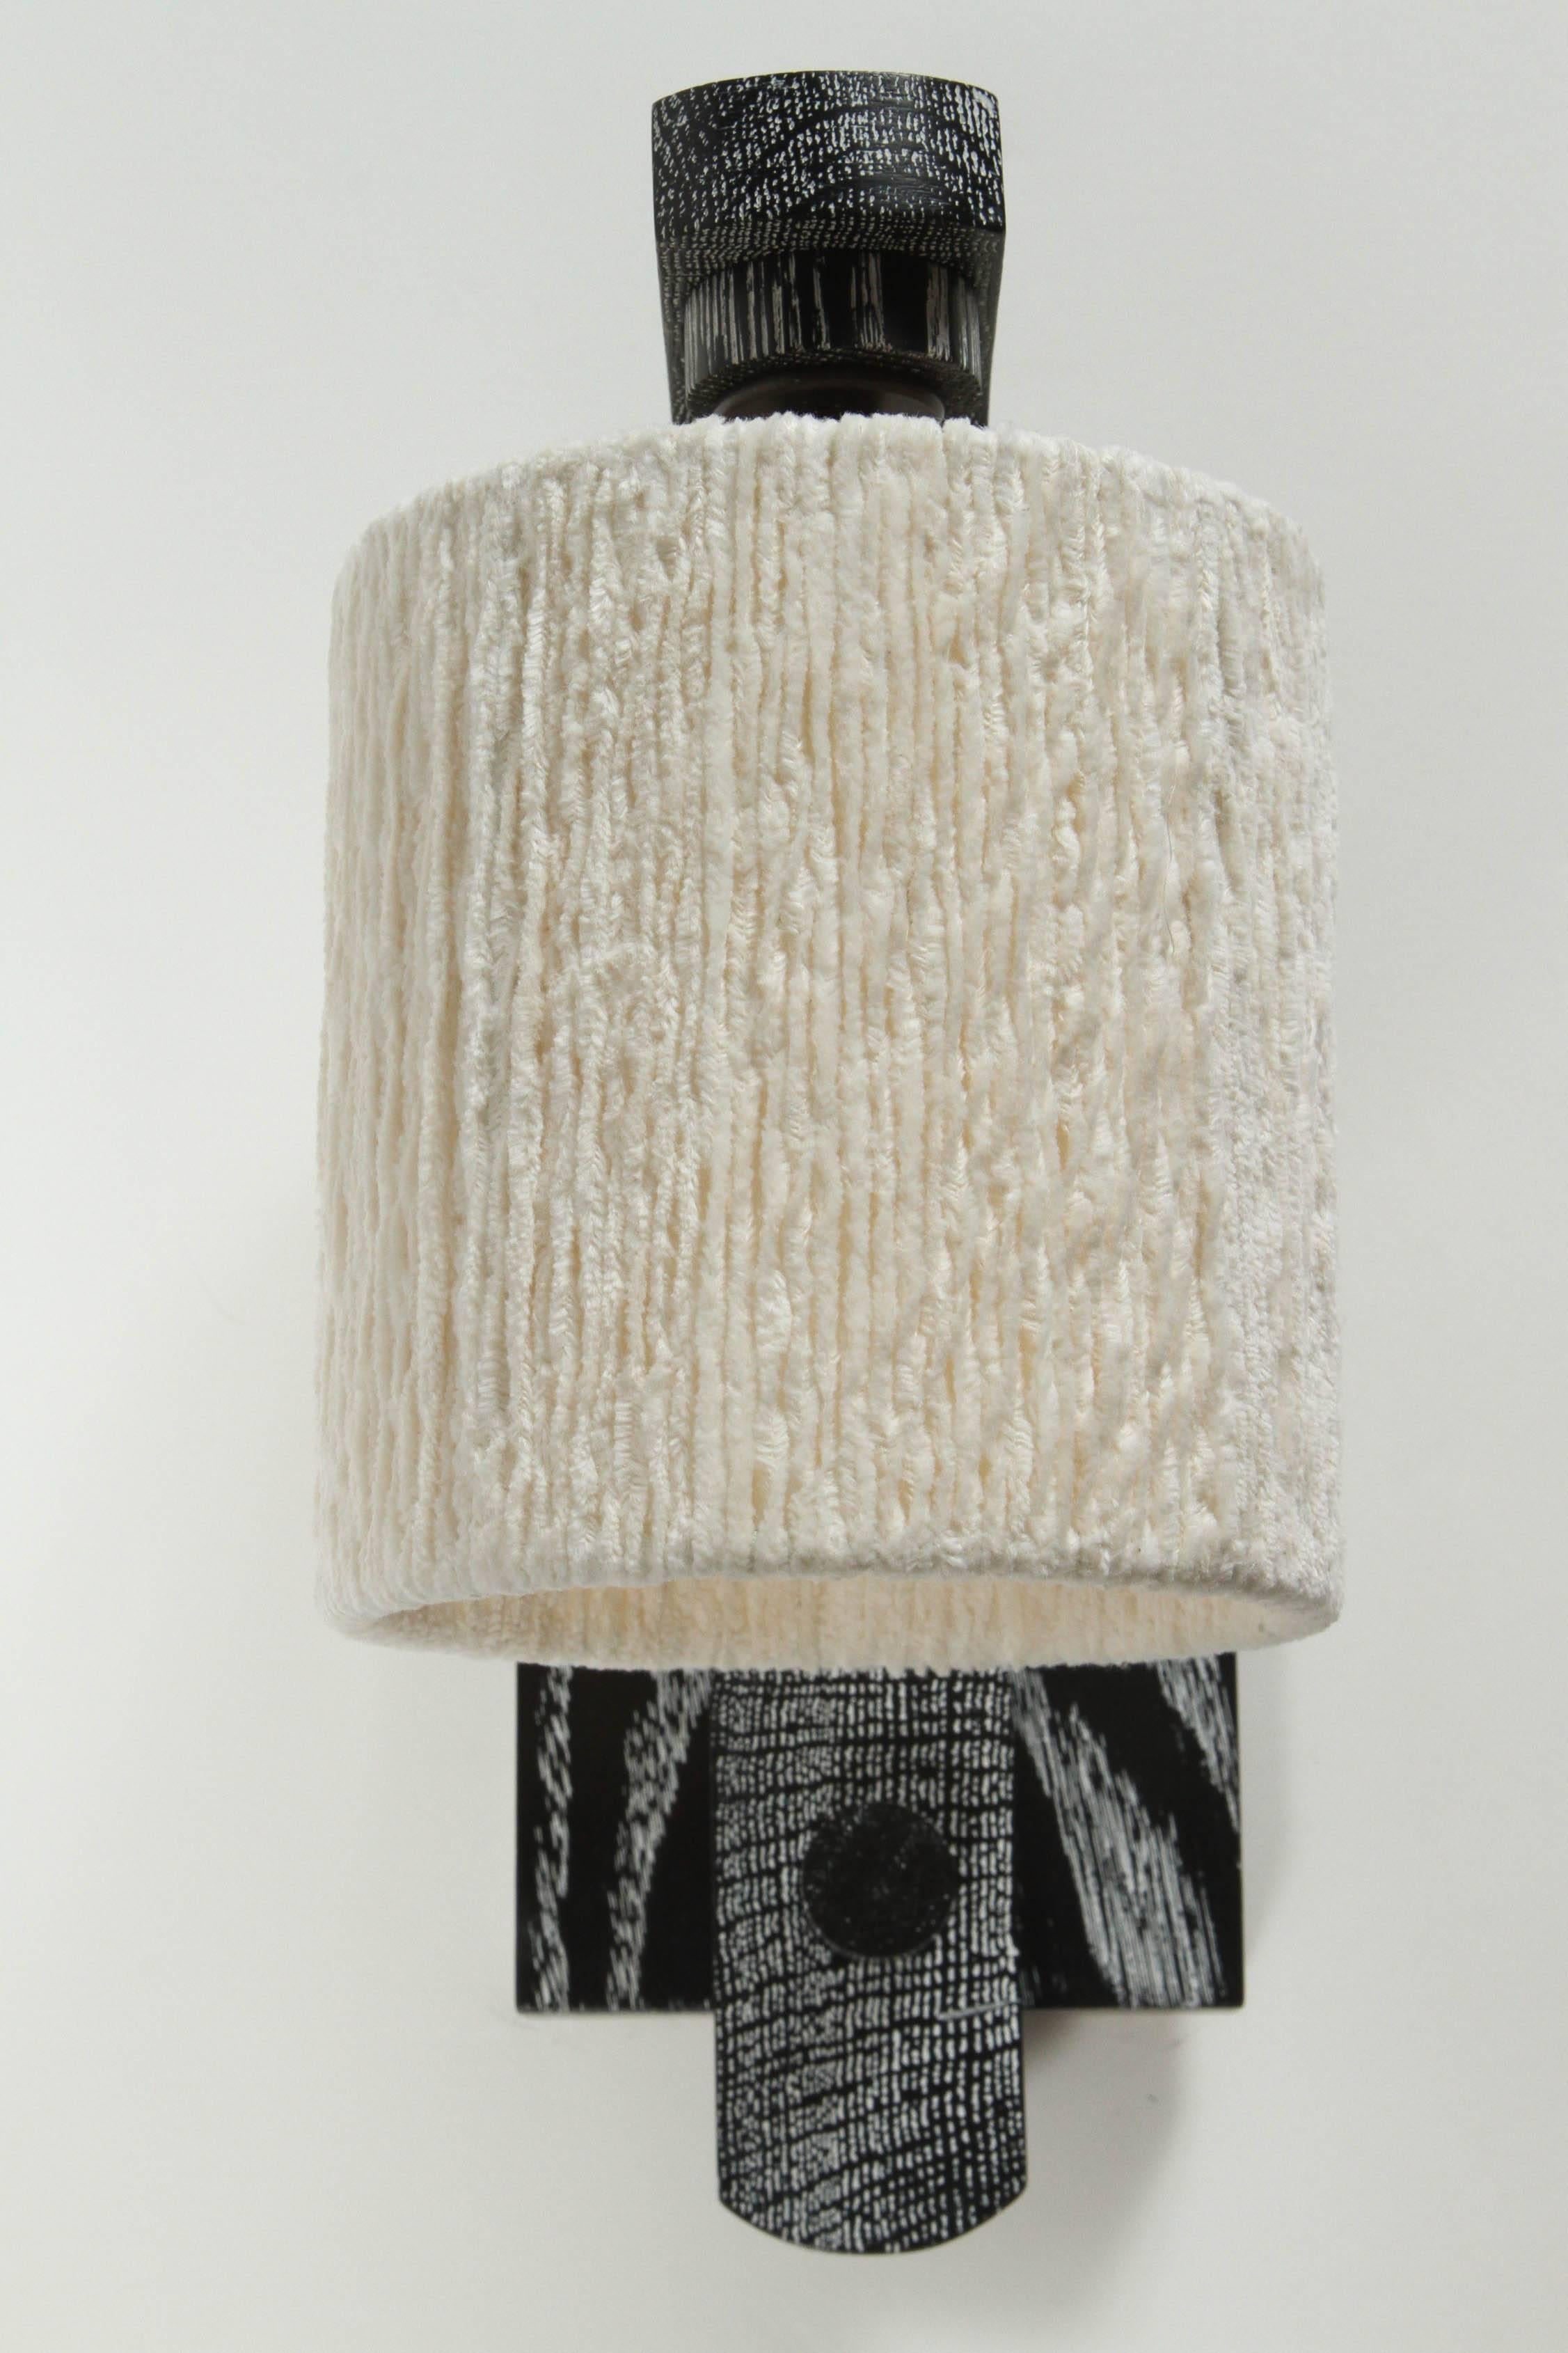 Paul Marra Oak Sconce with Cotton Chenille Shade 2